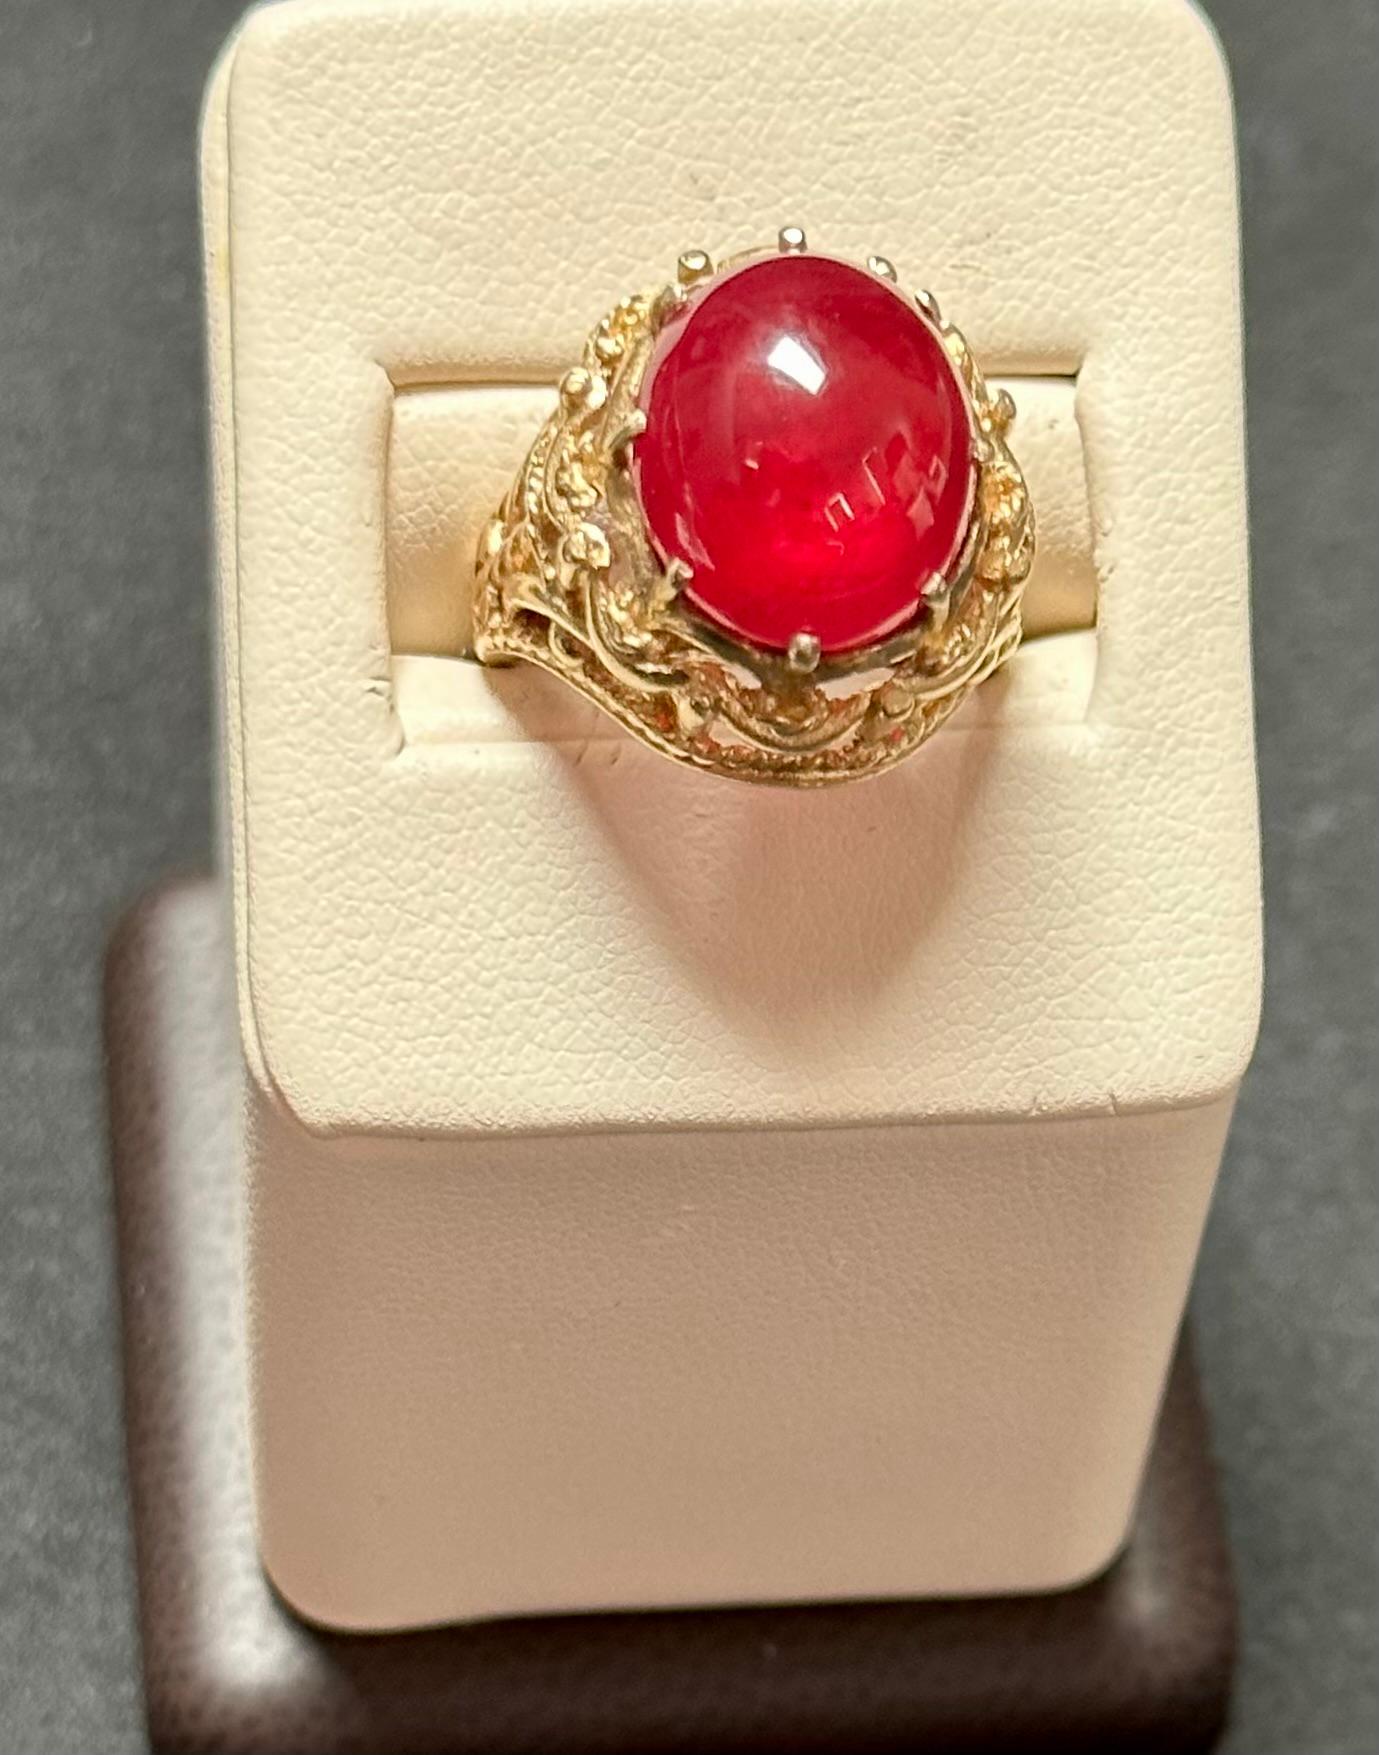 Introducing our stunning 14 Karat Yellow Gold Ring featuring a remarkable 7 carat Oval Cut Natural Pink Tourmaline Cabochon. This exquisite ring showcases the beauty of the pink tourmaline with its classic design and surrounding gold